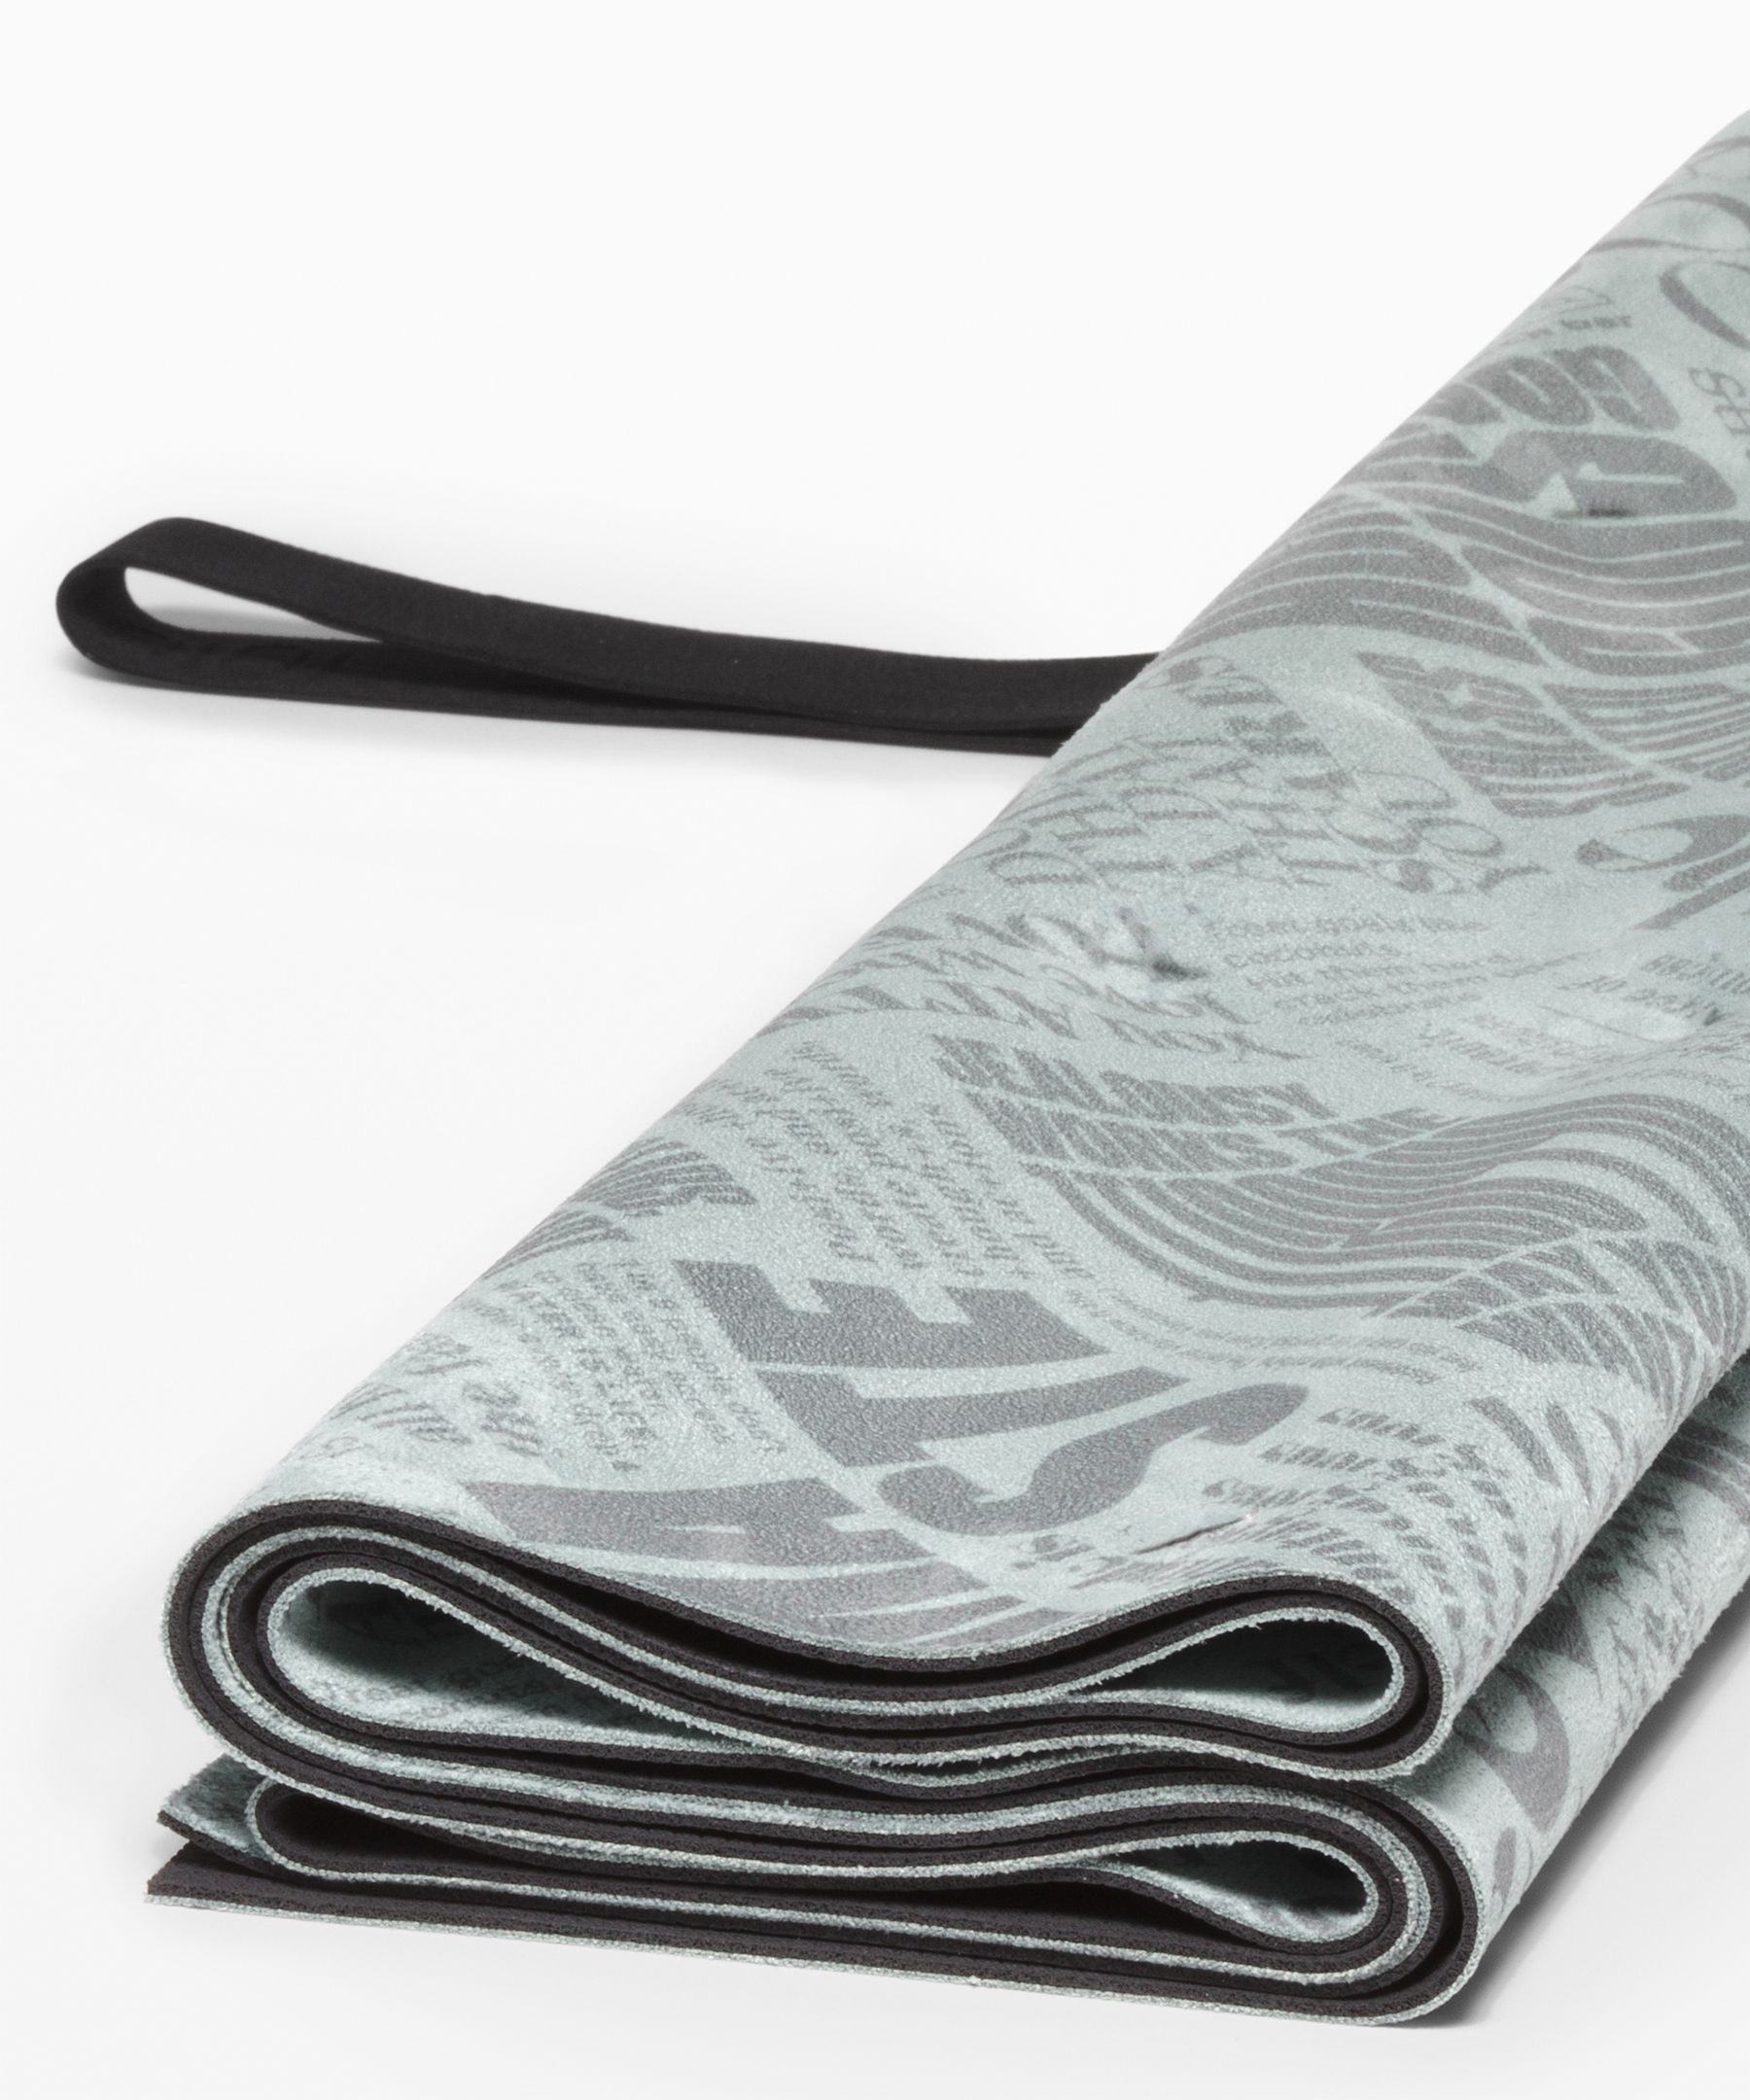 Has anybody used the Carry Onwards Travel Mat? Did you like it? : r/ lululemon